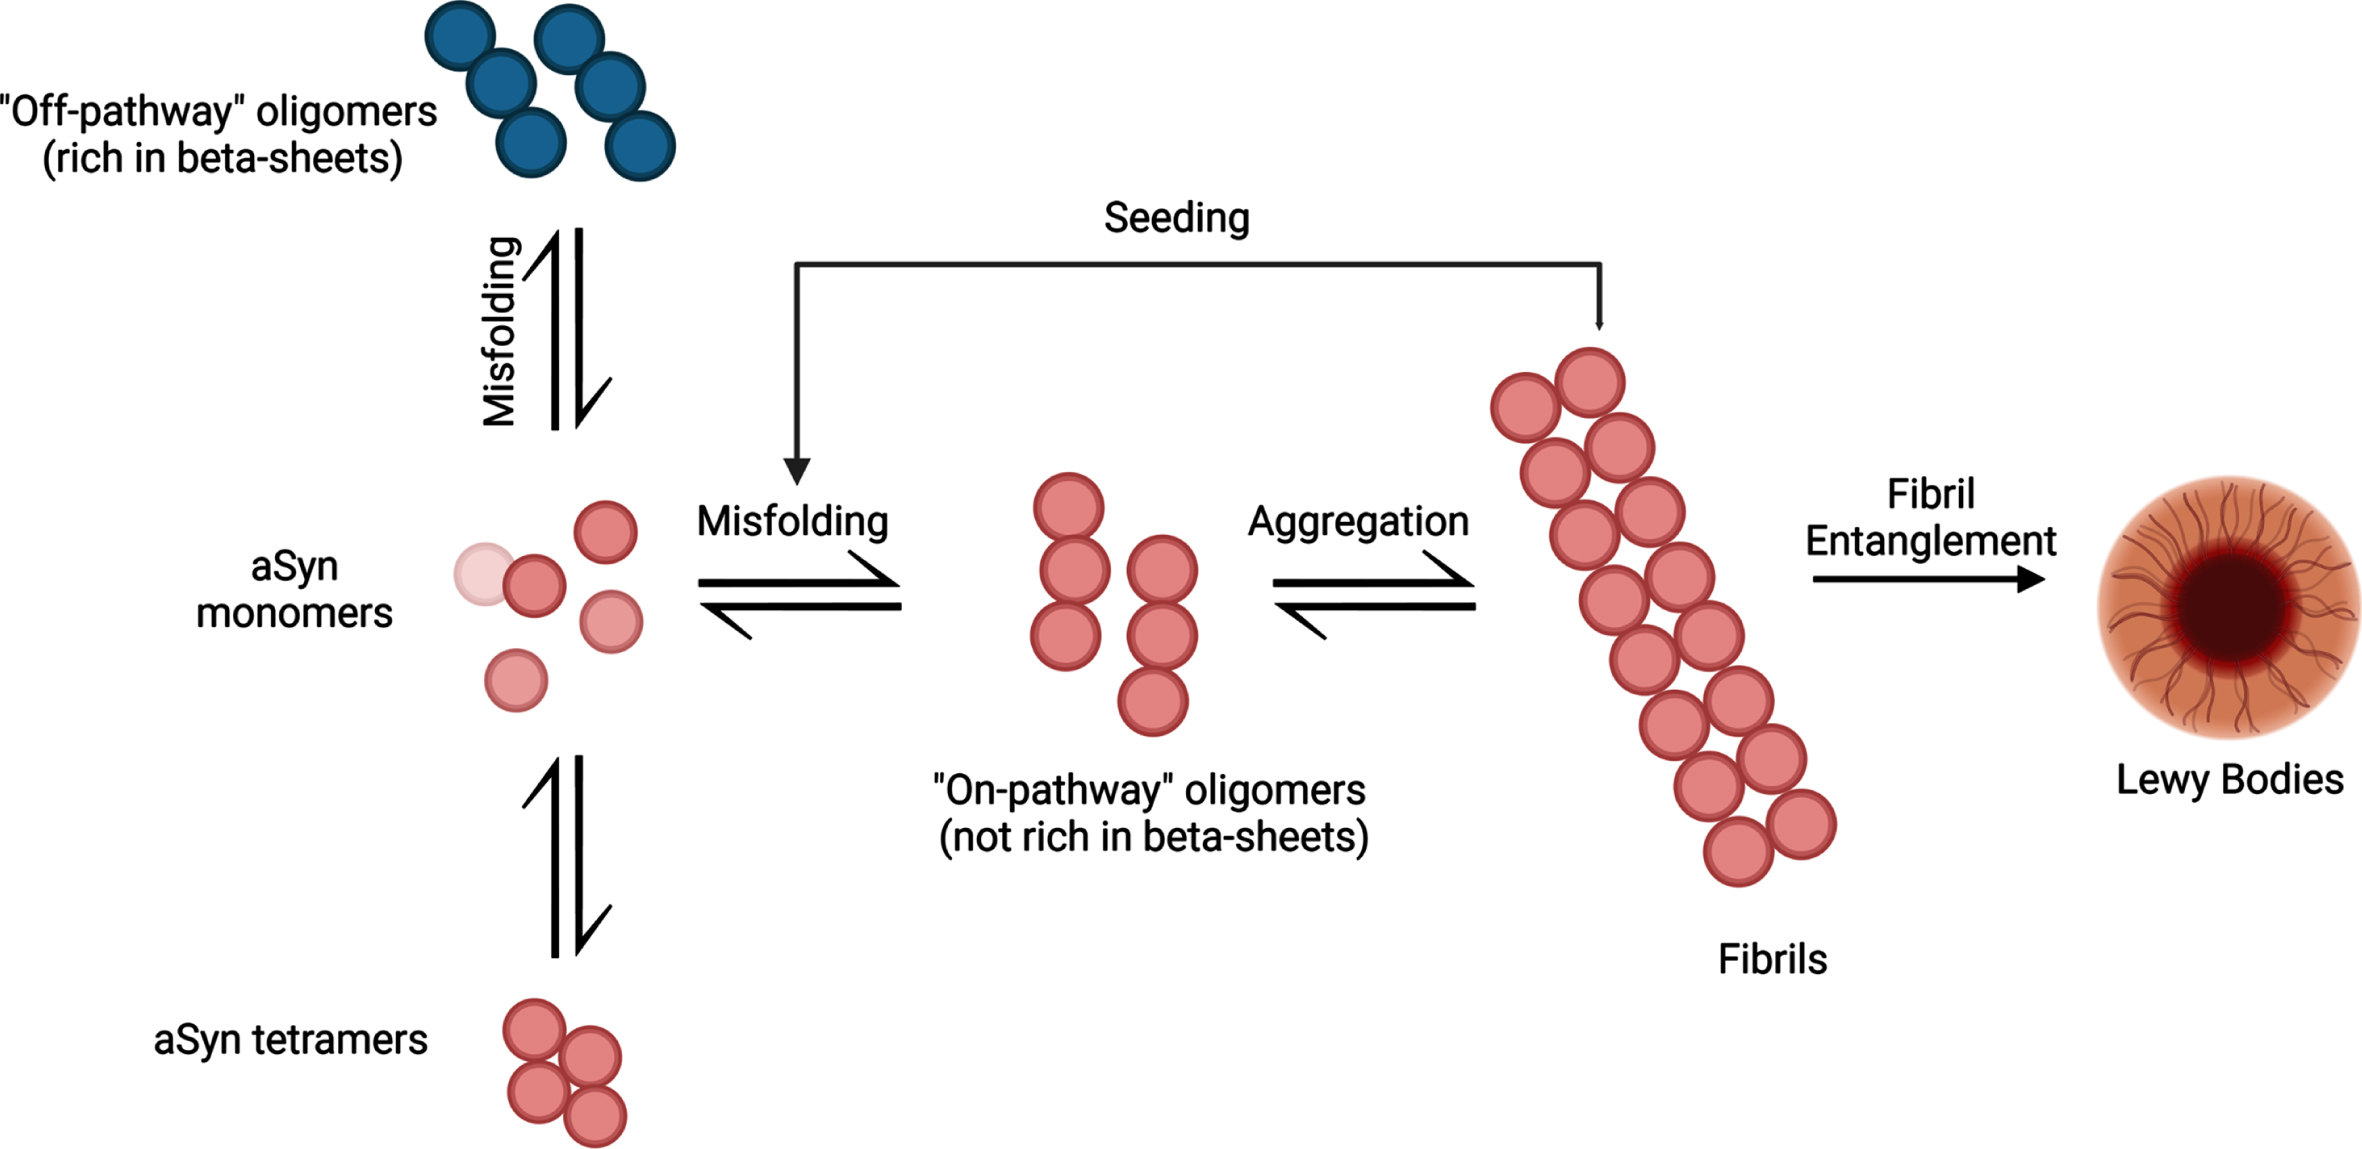 The aggregation process of aSyn protein. aSyn protein is normally found in natively unfolded monomeric structures but can also be found in α-helical tetramers when binding to lipid compounds. Aggregation of misfolded aSyn protein can either form oligomers that are rich in β-sheet formations (off-pathway) or oligomers that are not rich in β-sheet formations (on-pathway). Oligomers that are not rich in β-sheet conformations aggregate into fibrils, ultimately leading to the formation of LBs. These pathologic aSyn fibrils can act as a template for aSyn monomers and induce misfolding, creating a cycle of misfolding and aggregation of aSyn. Created with BioRender.com.